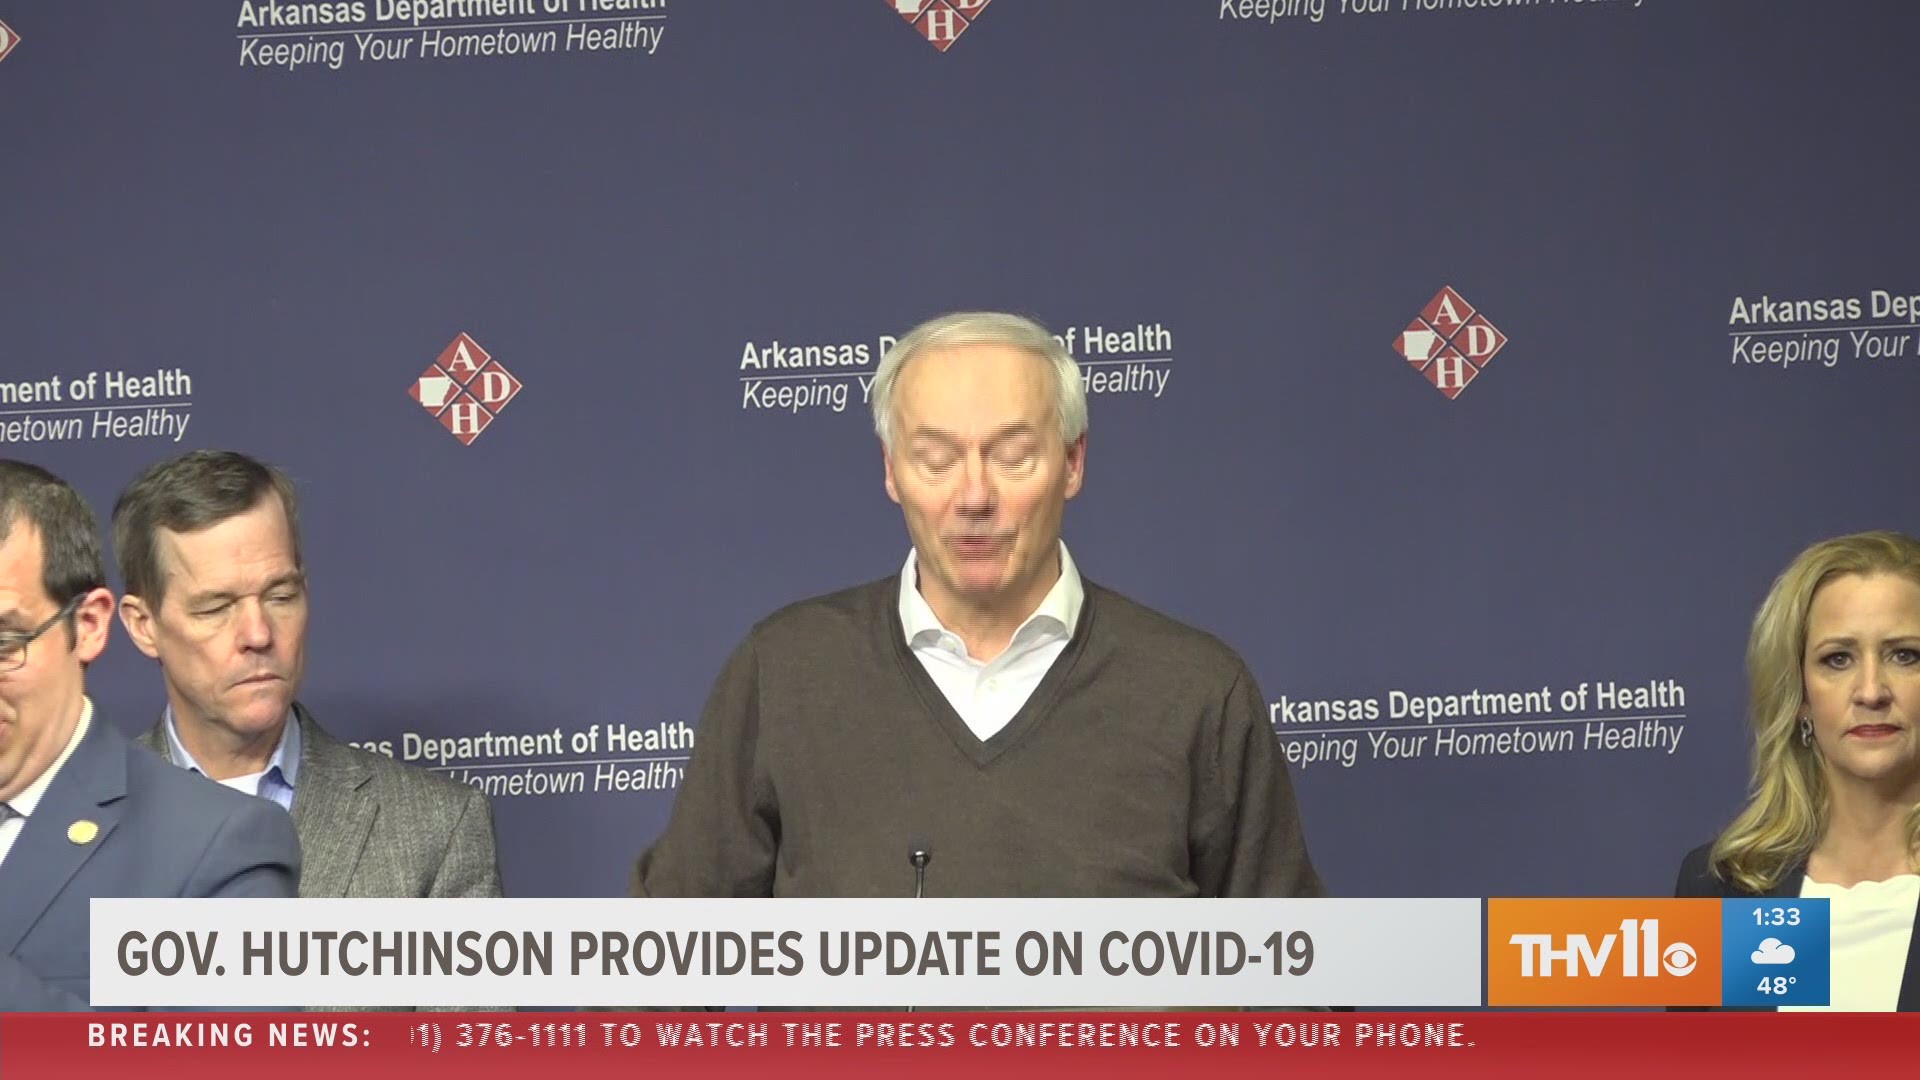 In a press conference Sunday, Governor Hutchinson said the state should be able to run 440 COVID-19 tests per day throughout the state by next week.